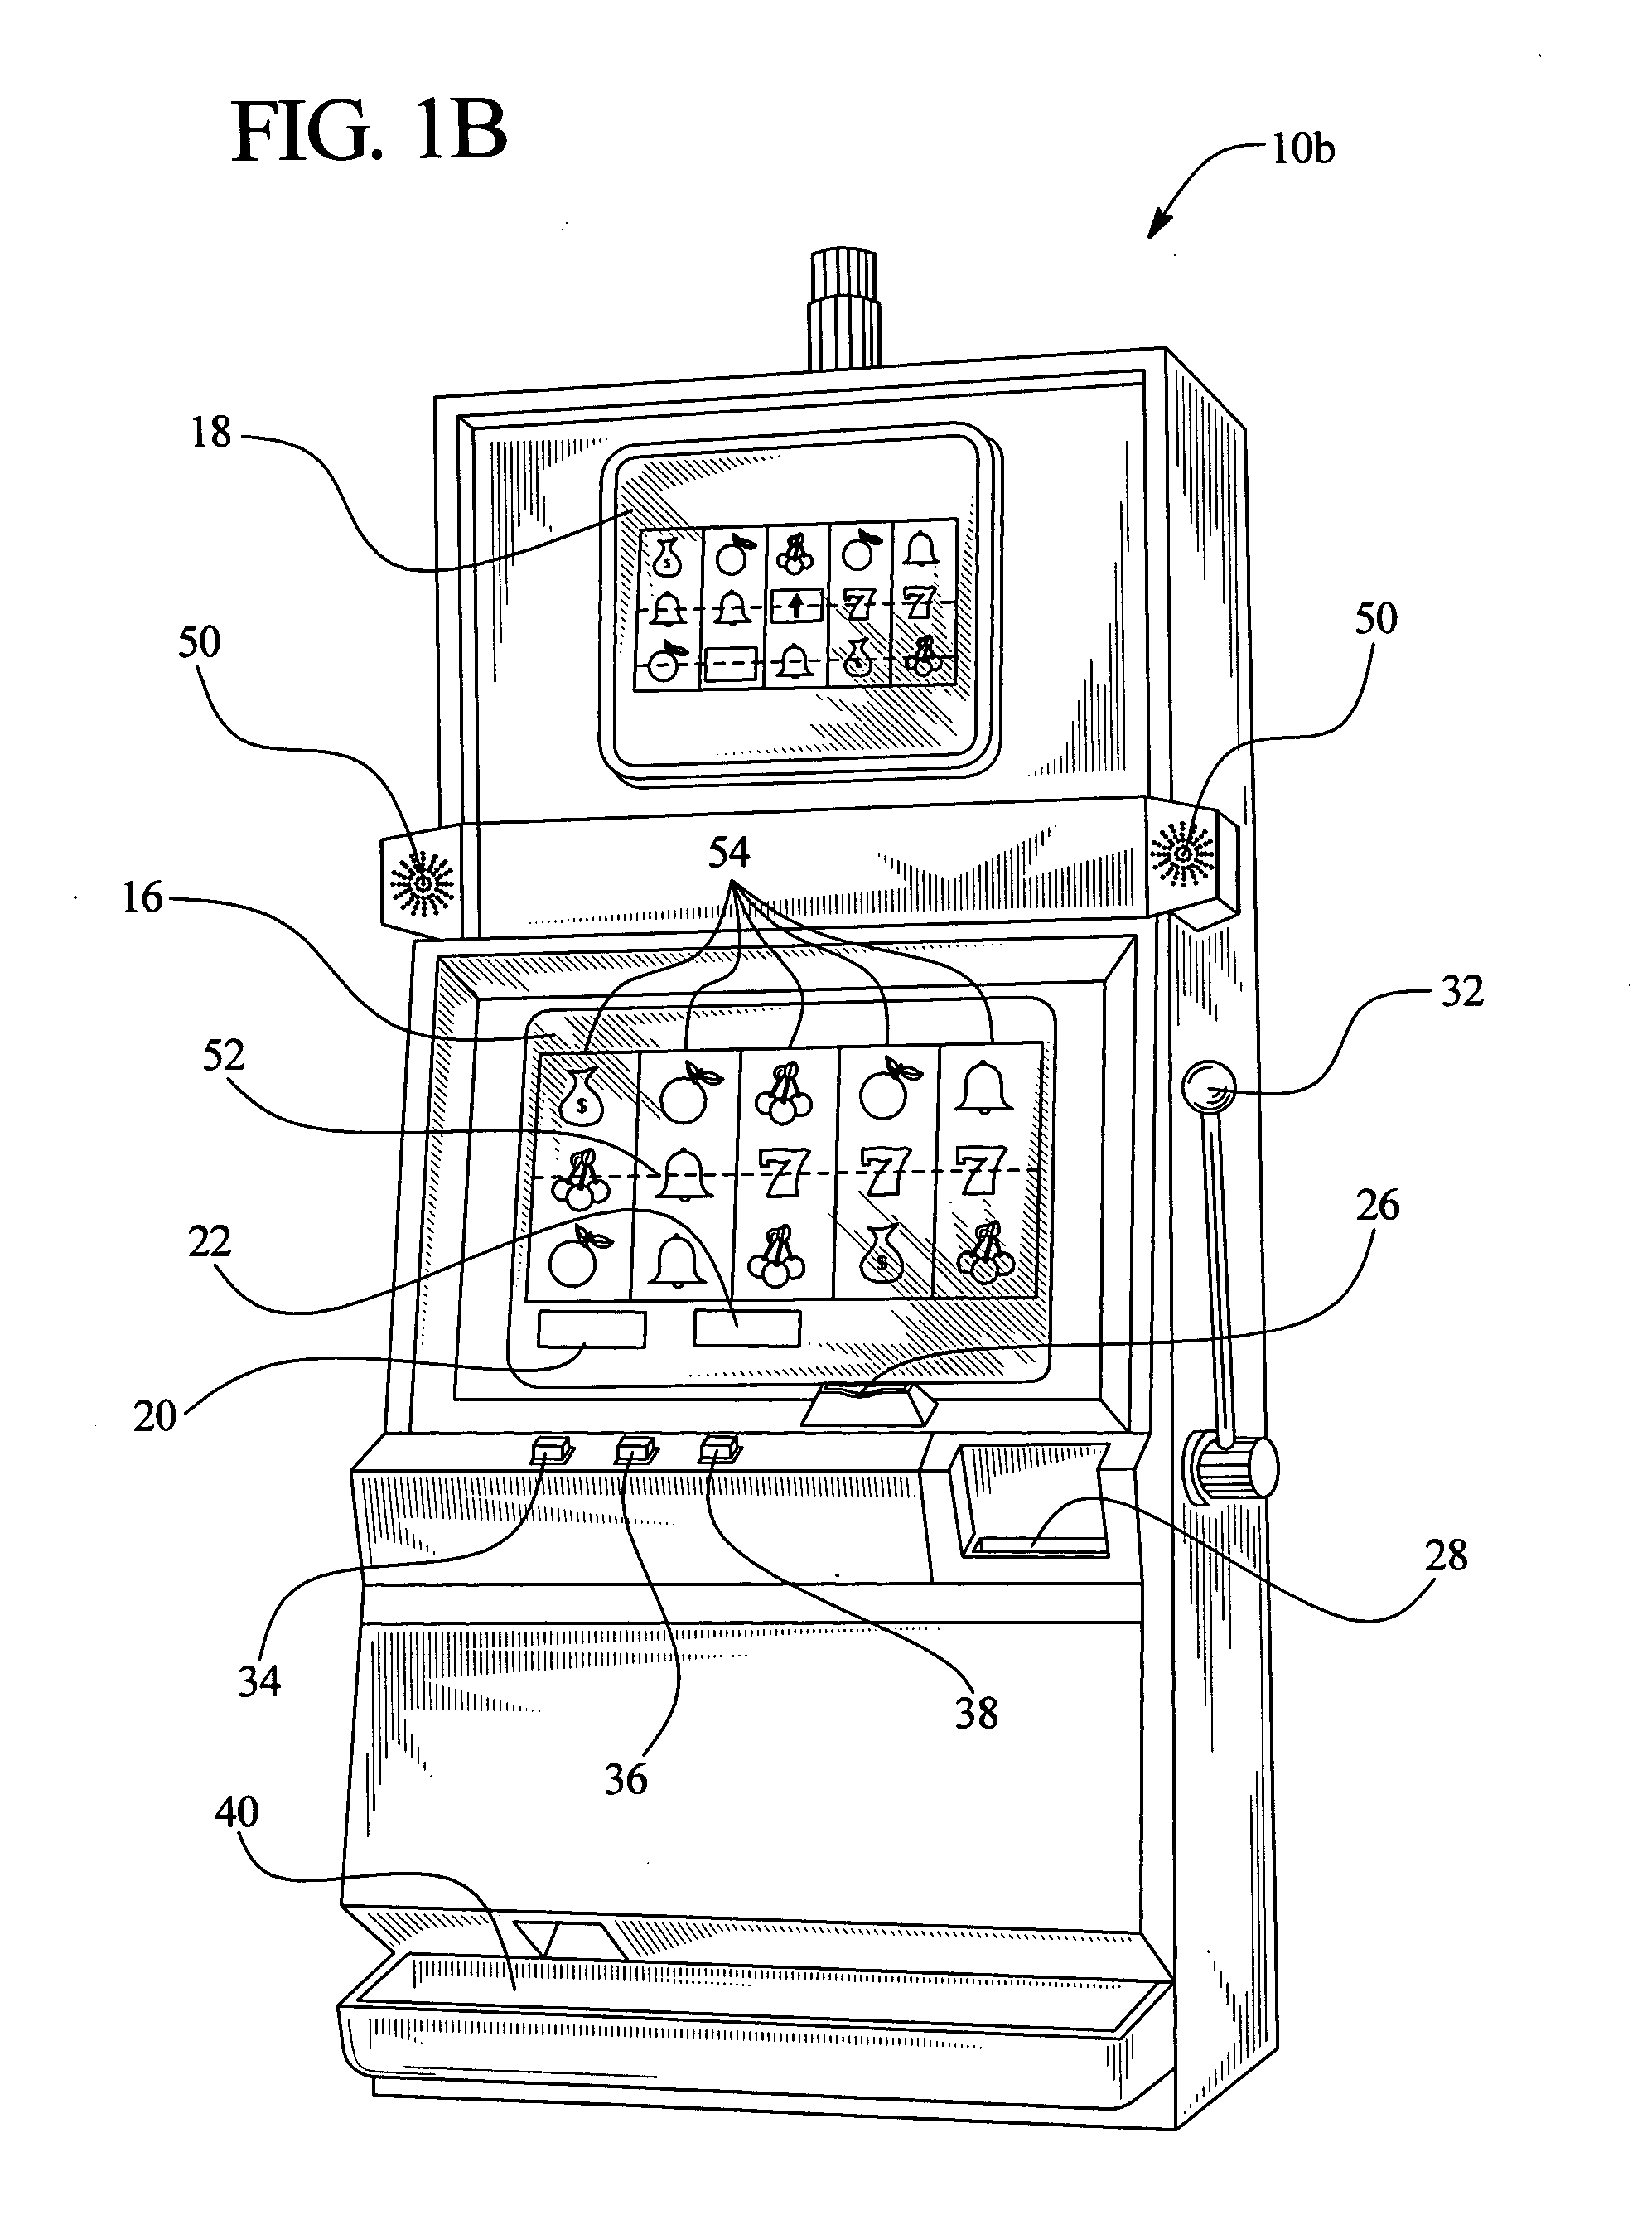 Gaming device having concentric reels and a displayable nudge symbol